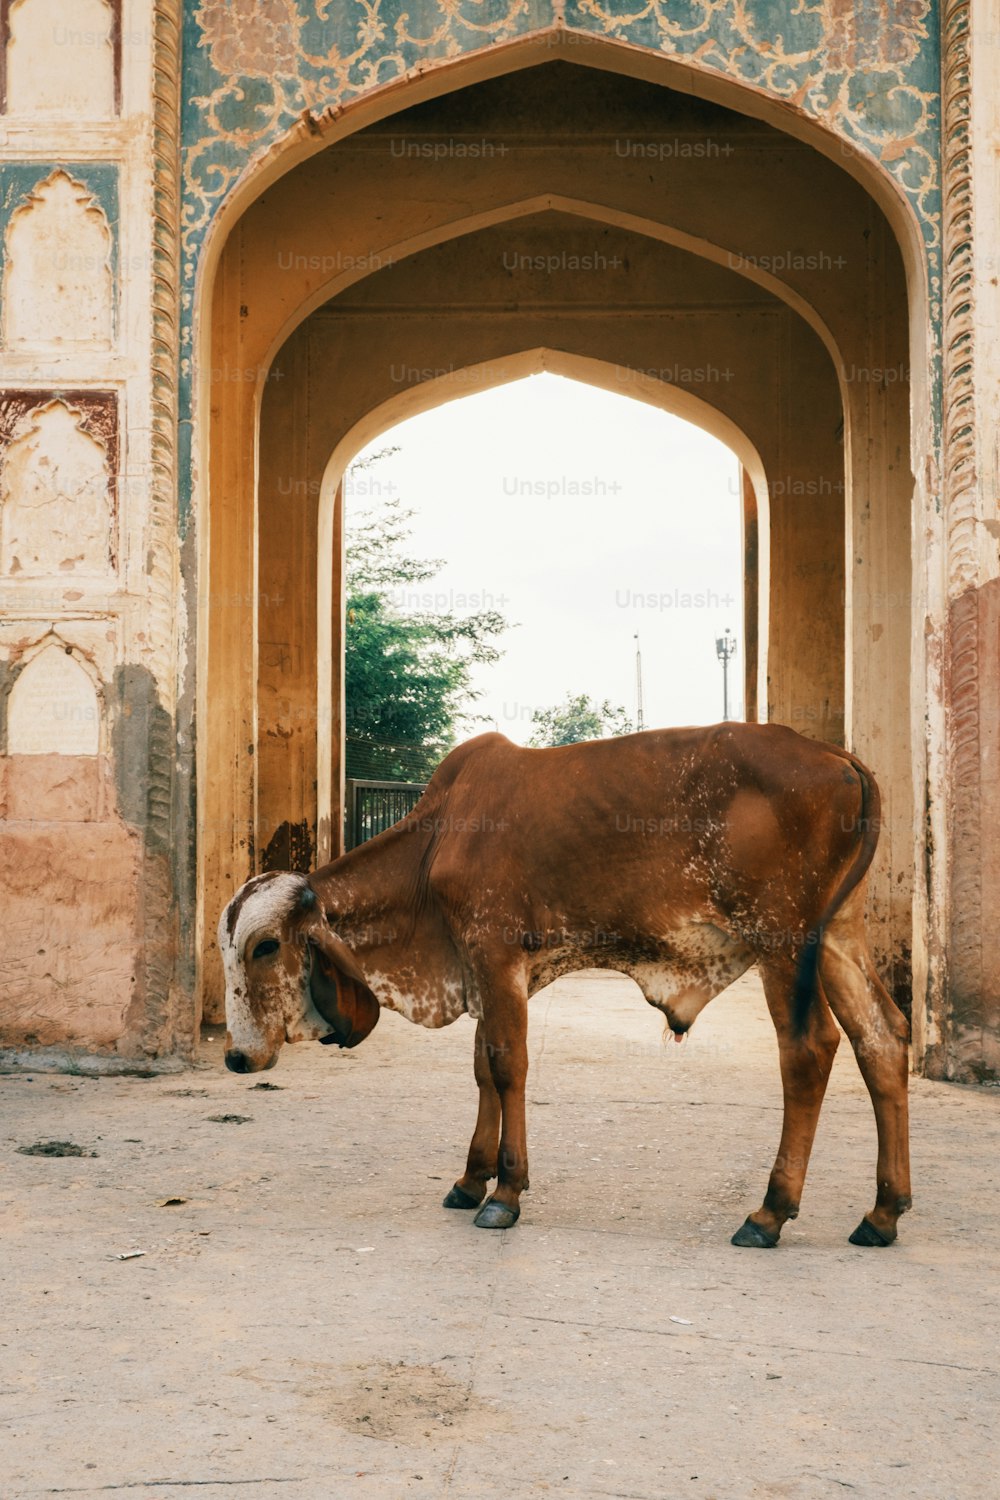 a brown cow standing in front of an archway